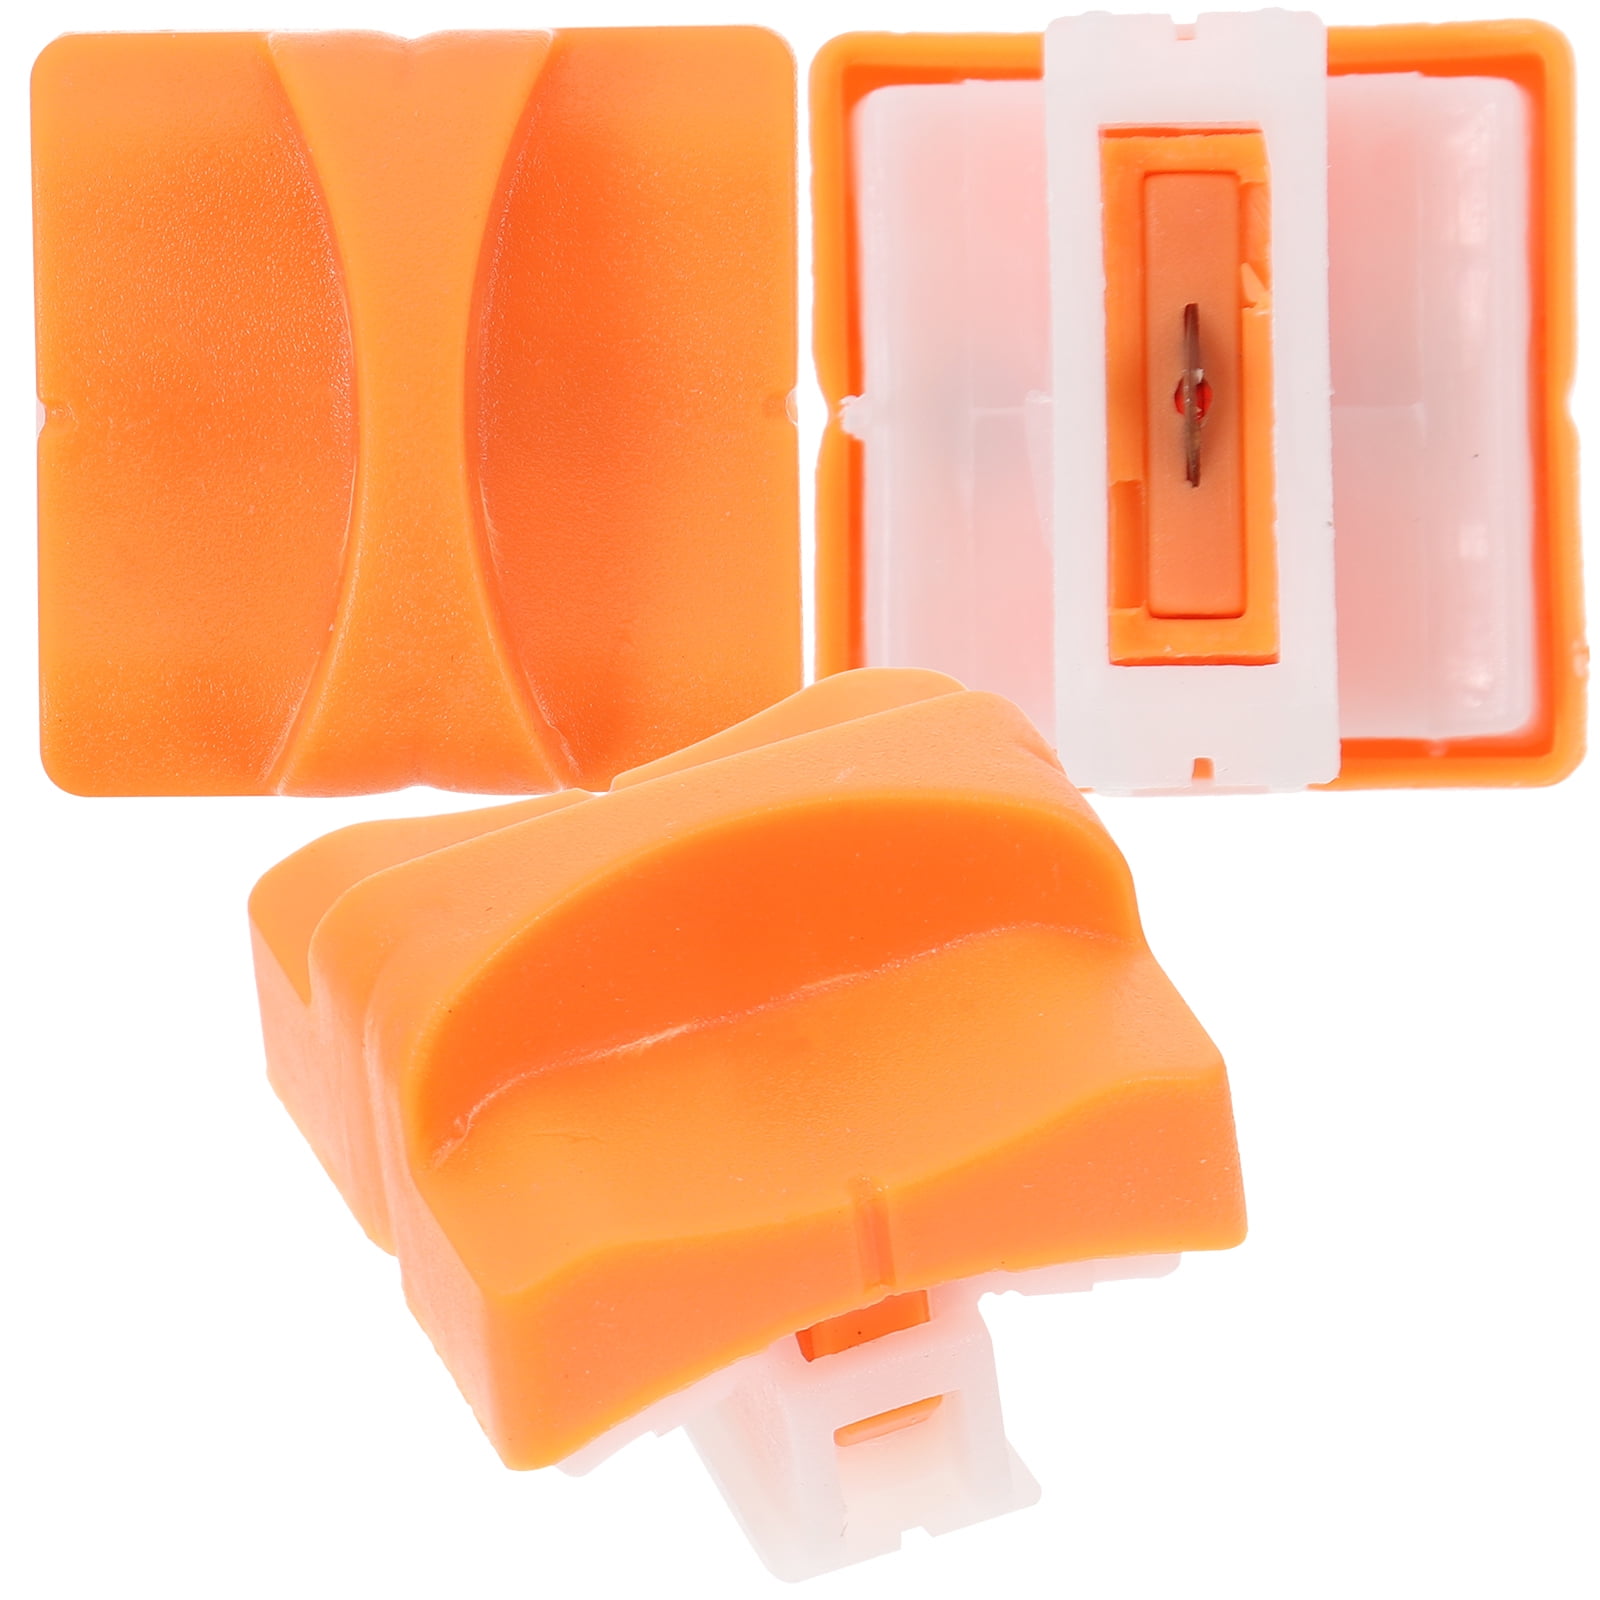 6 Pcs Paper Trimmer Replacement Blades Craft Paper Cutting Replacement  Blades for A4 Paper Cutter(Orange